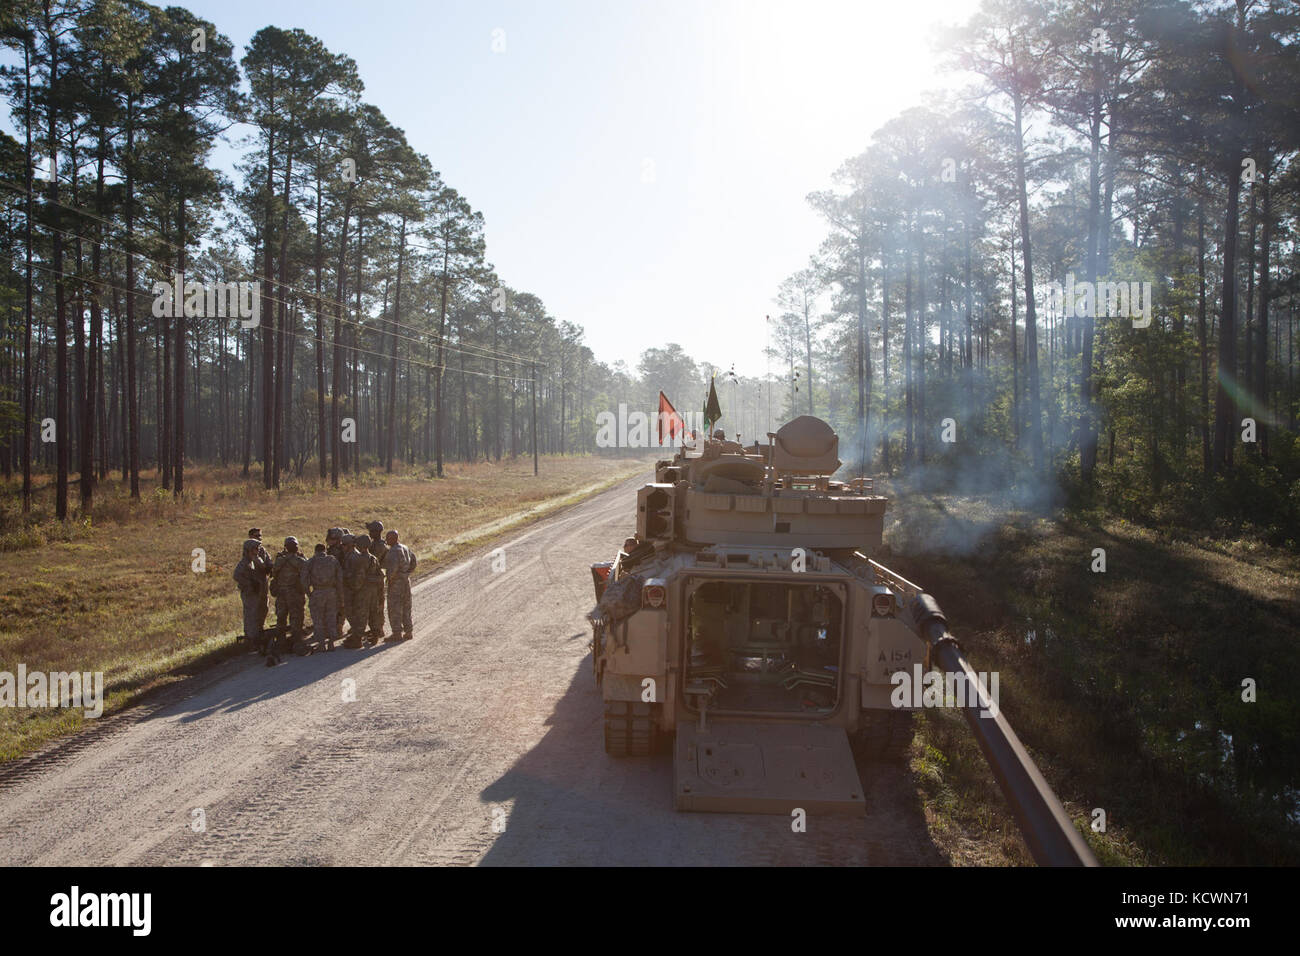 U.S. Soldiers with Company A, 4-118th Combined Arms Battalion, South Carolina Army National Guard, participate in gunnery training April 9, 2017 at Fort Stewart, Georgia. (U.S. Army photo by Capt. Joshua Chastain) Stock Photo